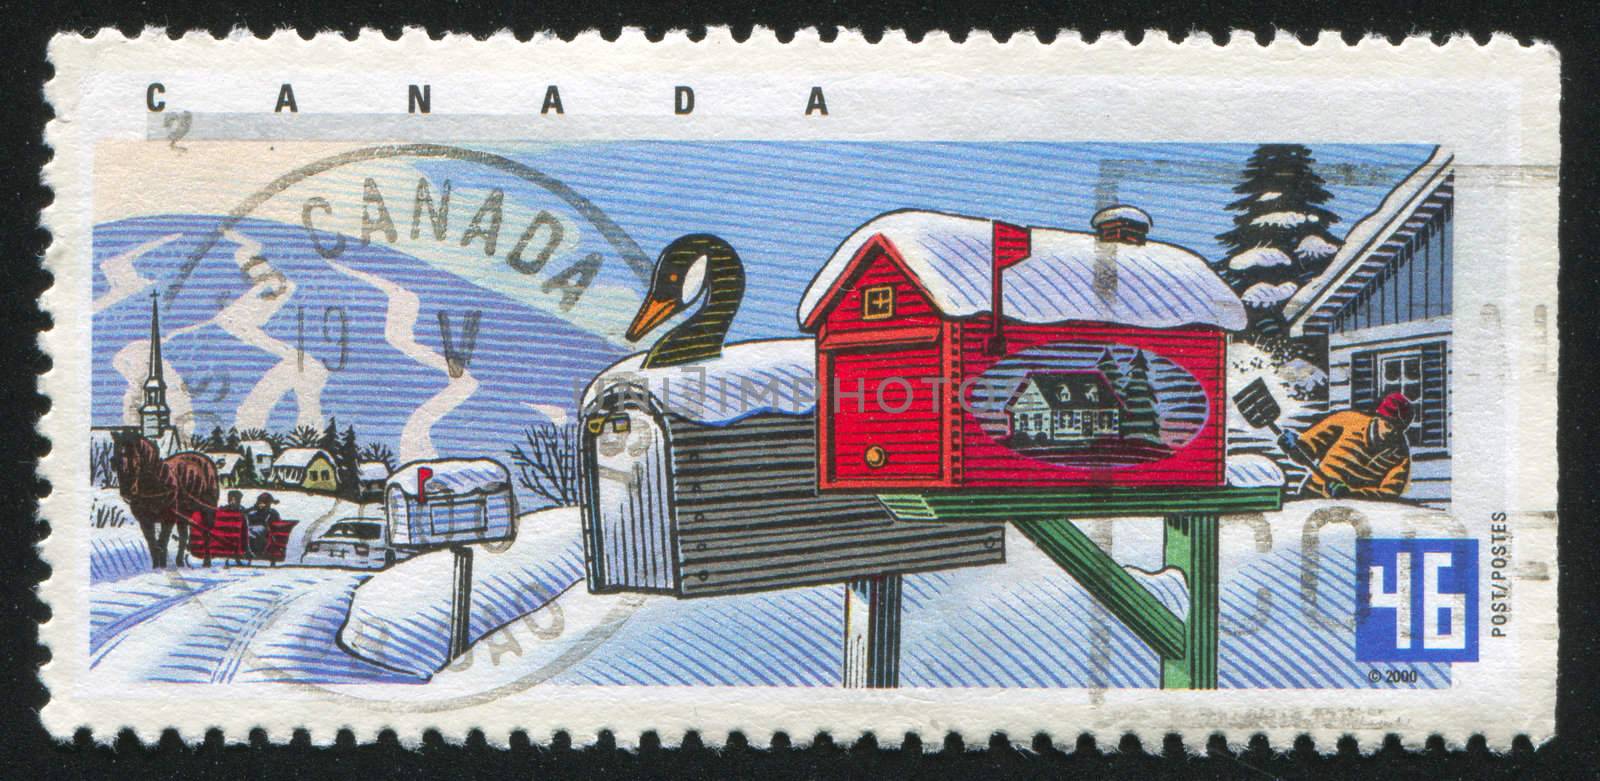 CANADA - CIRCA 2000: stamp printed by Canada, shows Decorated Rural Mailboxes, Goose head, house designs,  circa 2000